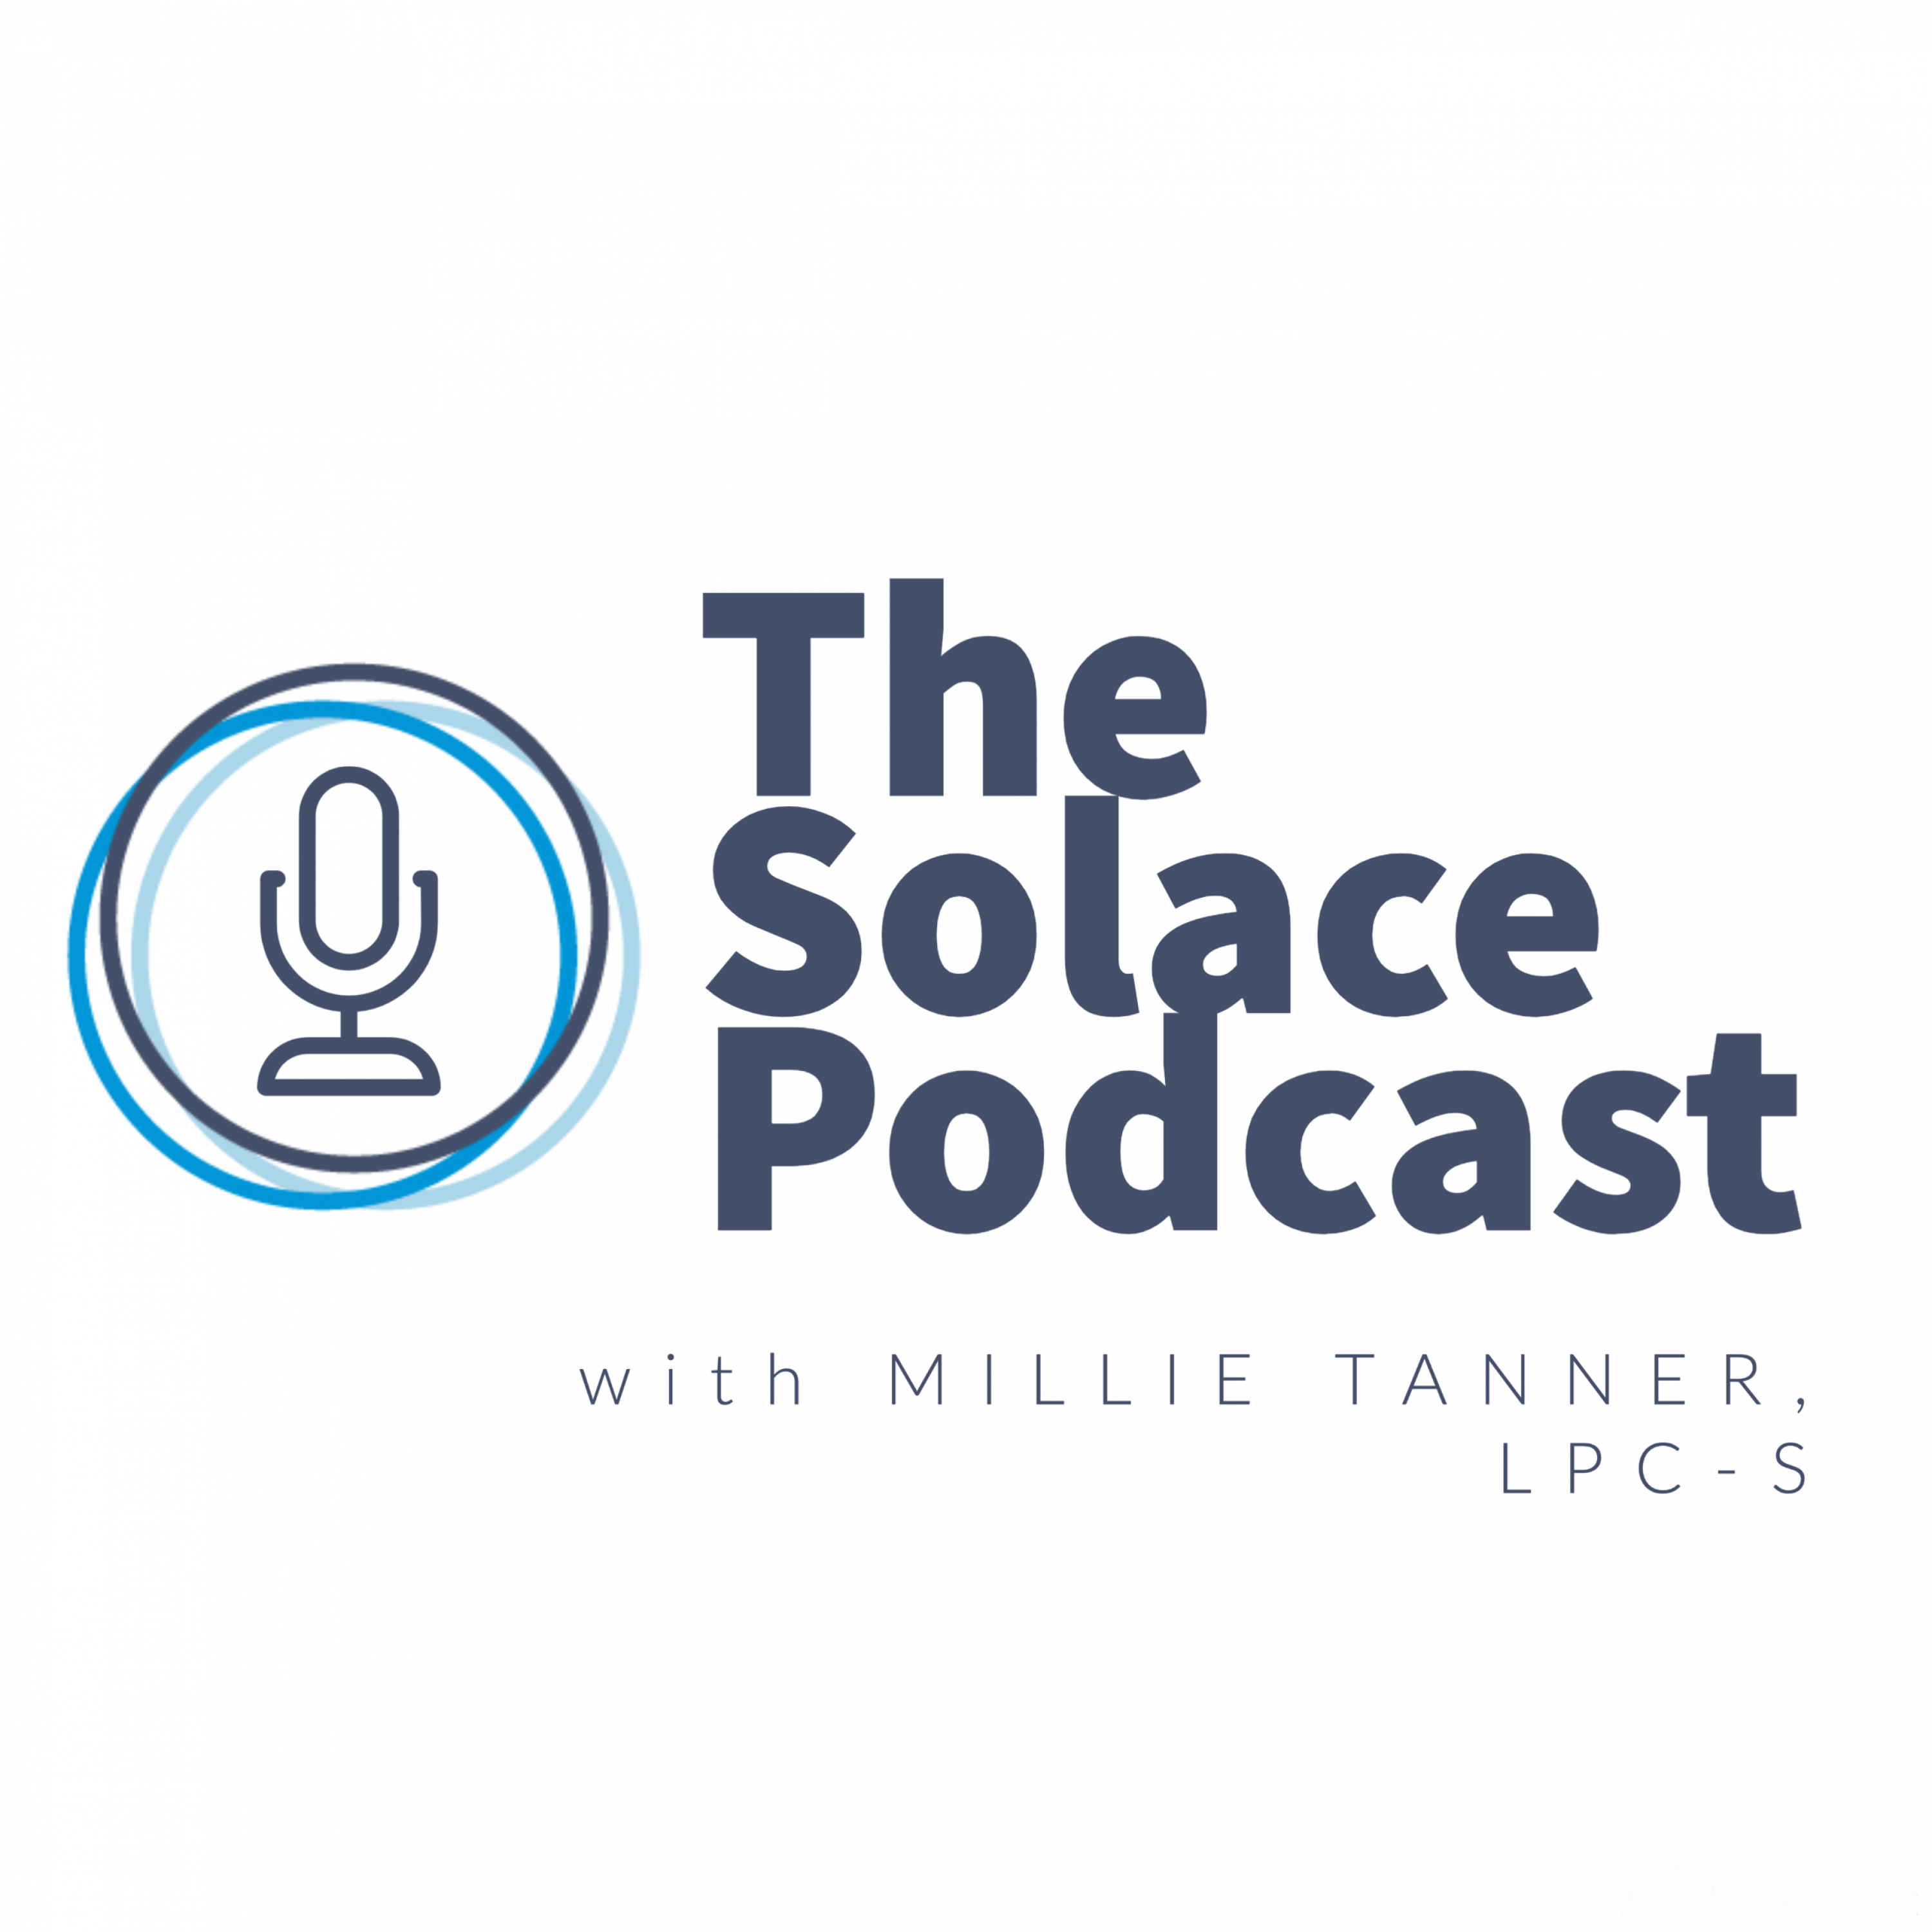 The Solace Podcast